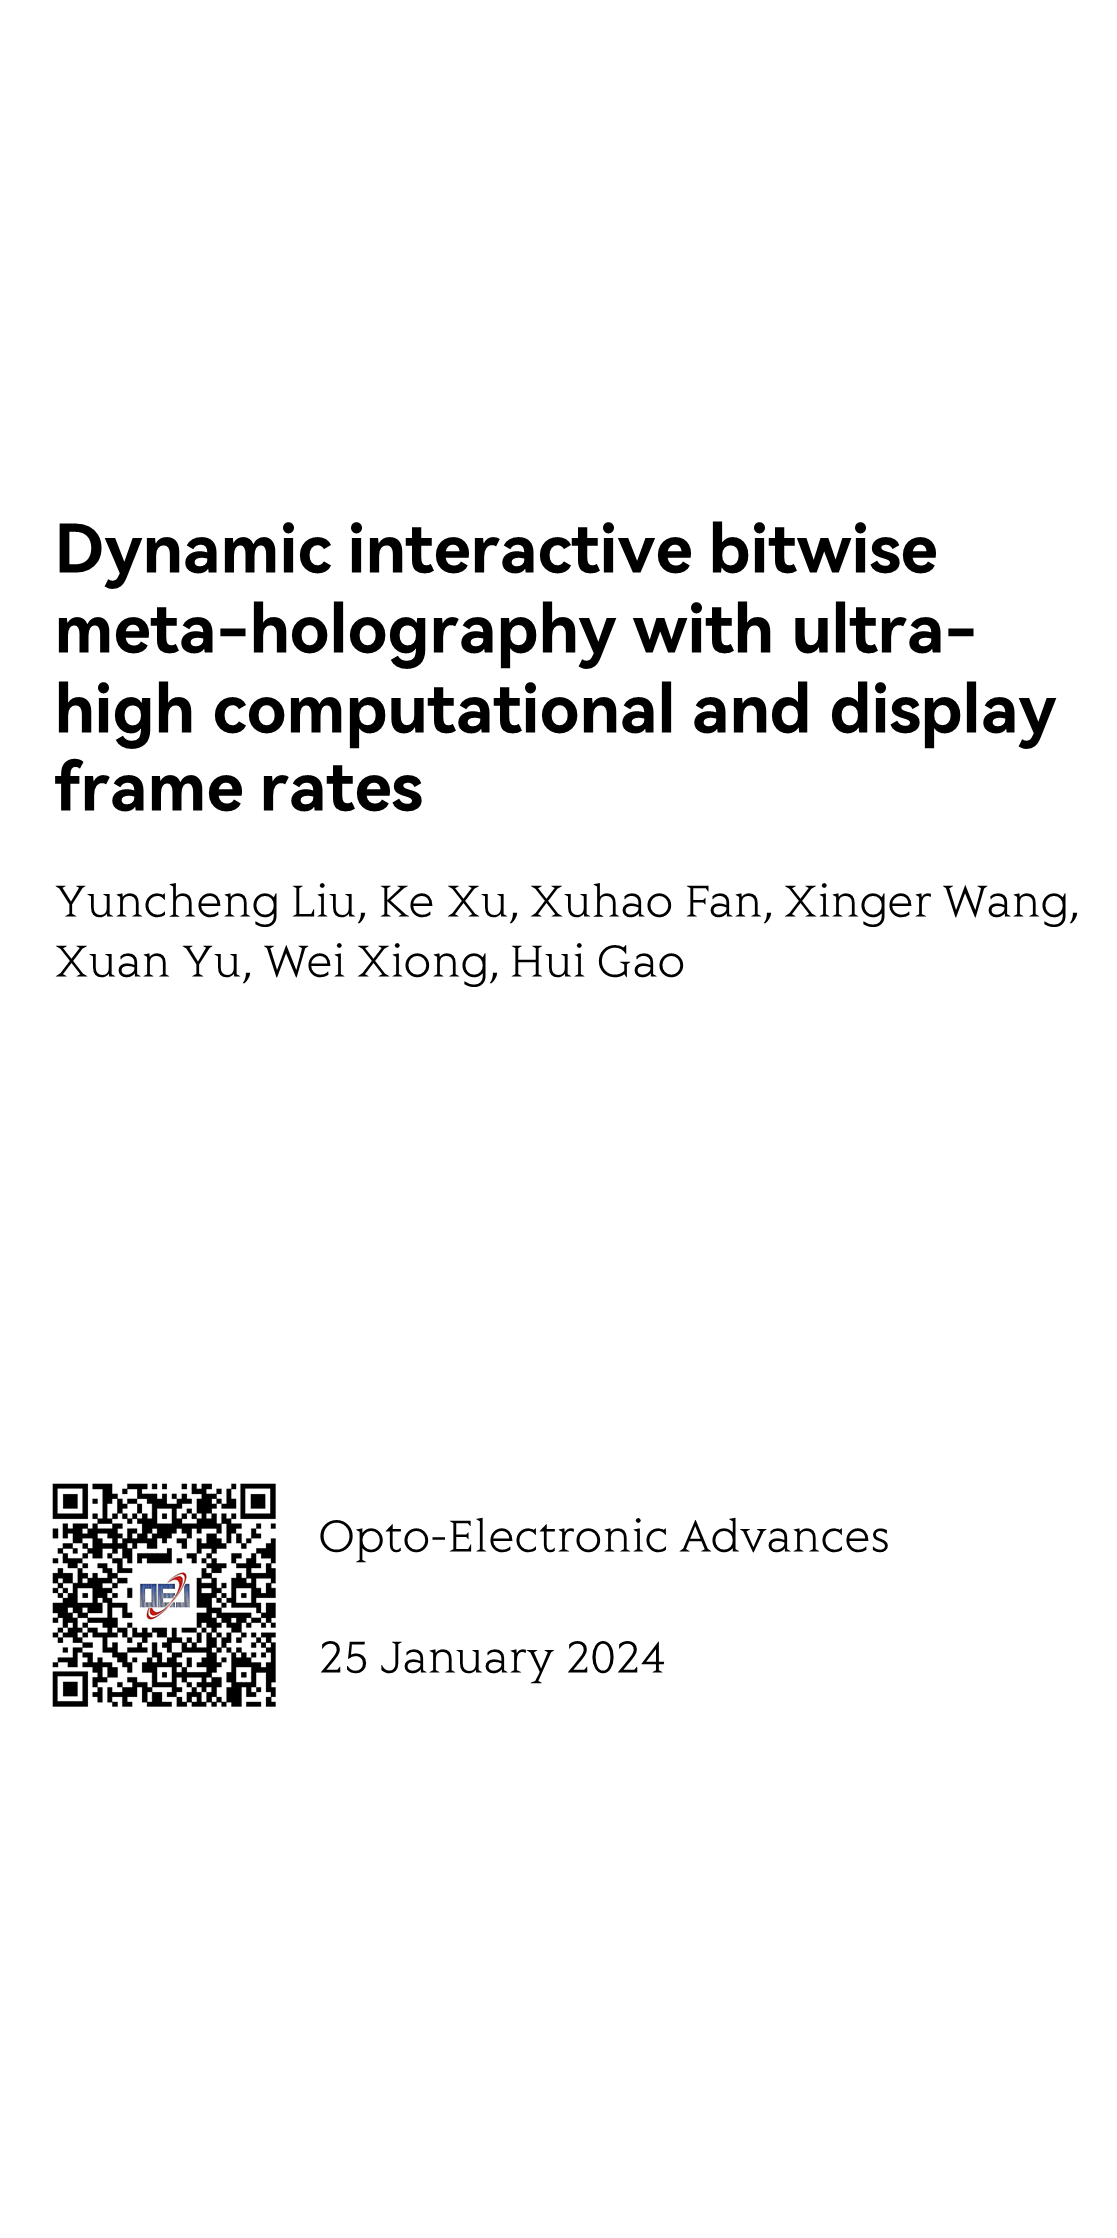 Dynamic interactive bitwise meta-holography with ultra-high computational and display frame rates_1